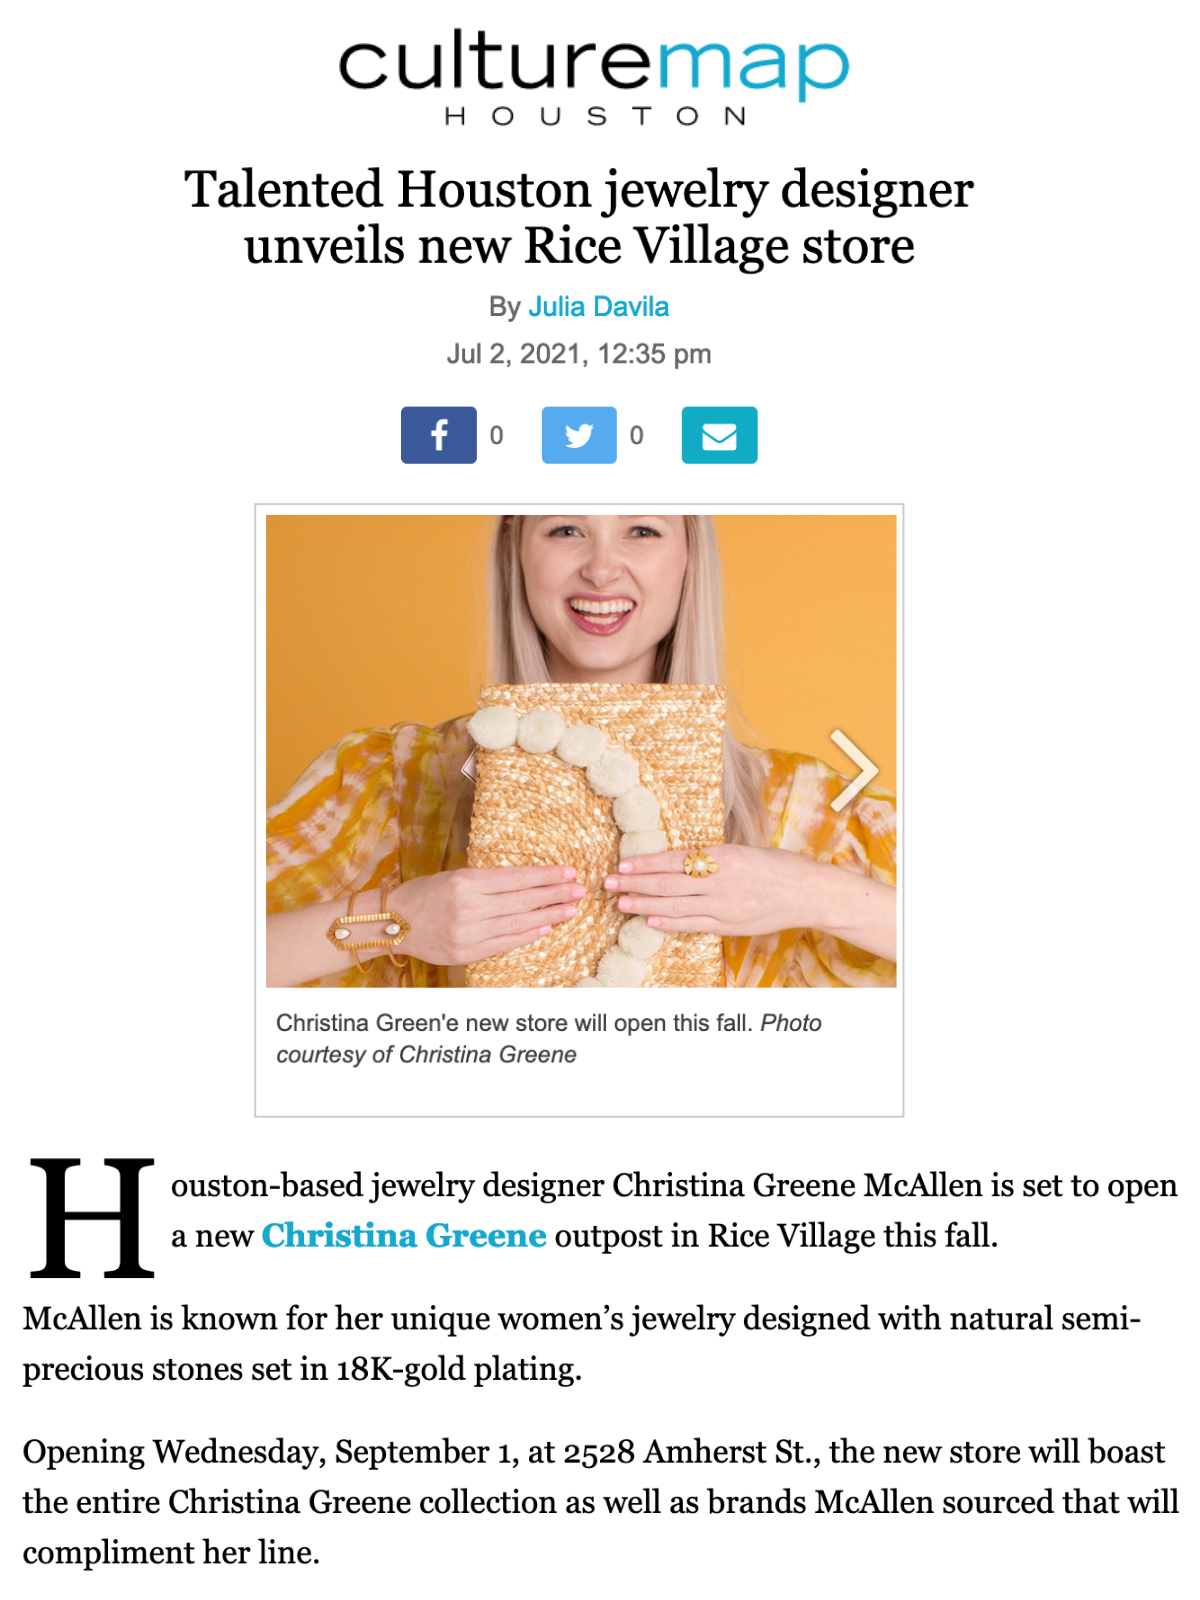 Press Clipping from CultureMap.com Announcing Christina Greene jewelry's new store in Rice Village, Houston, this Fall 2021